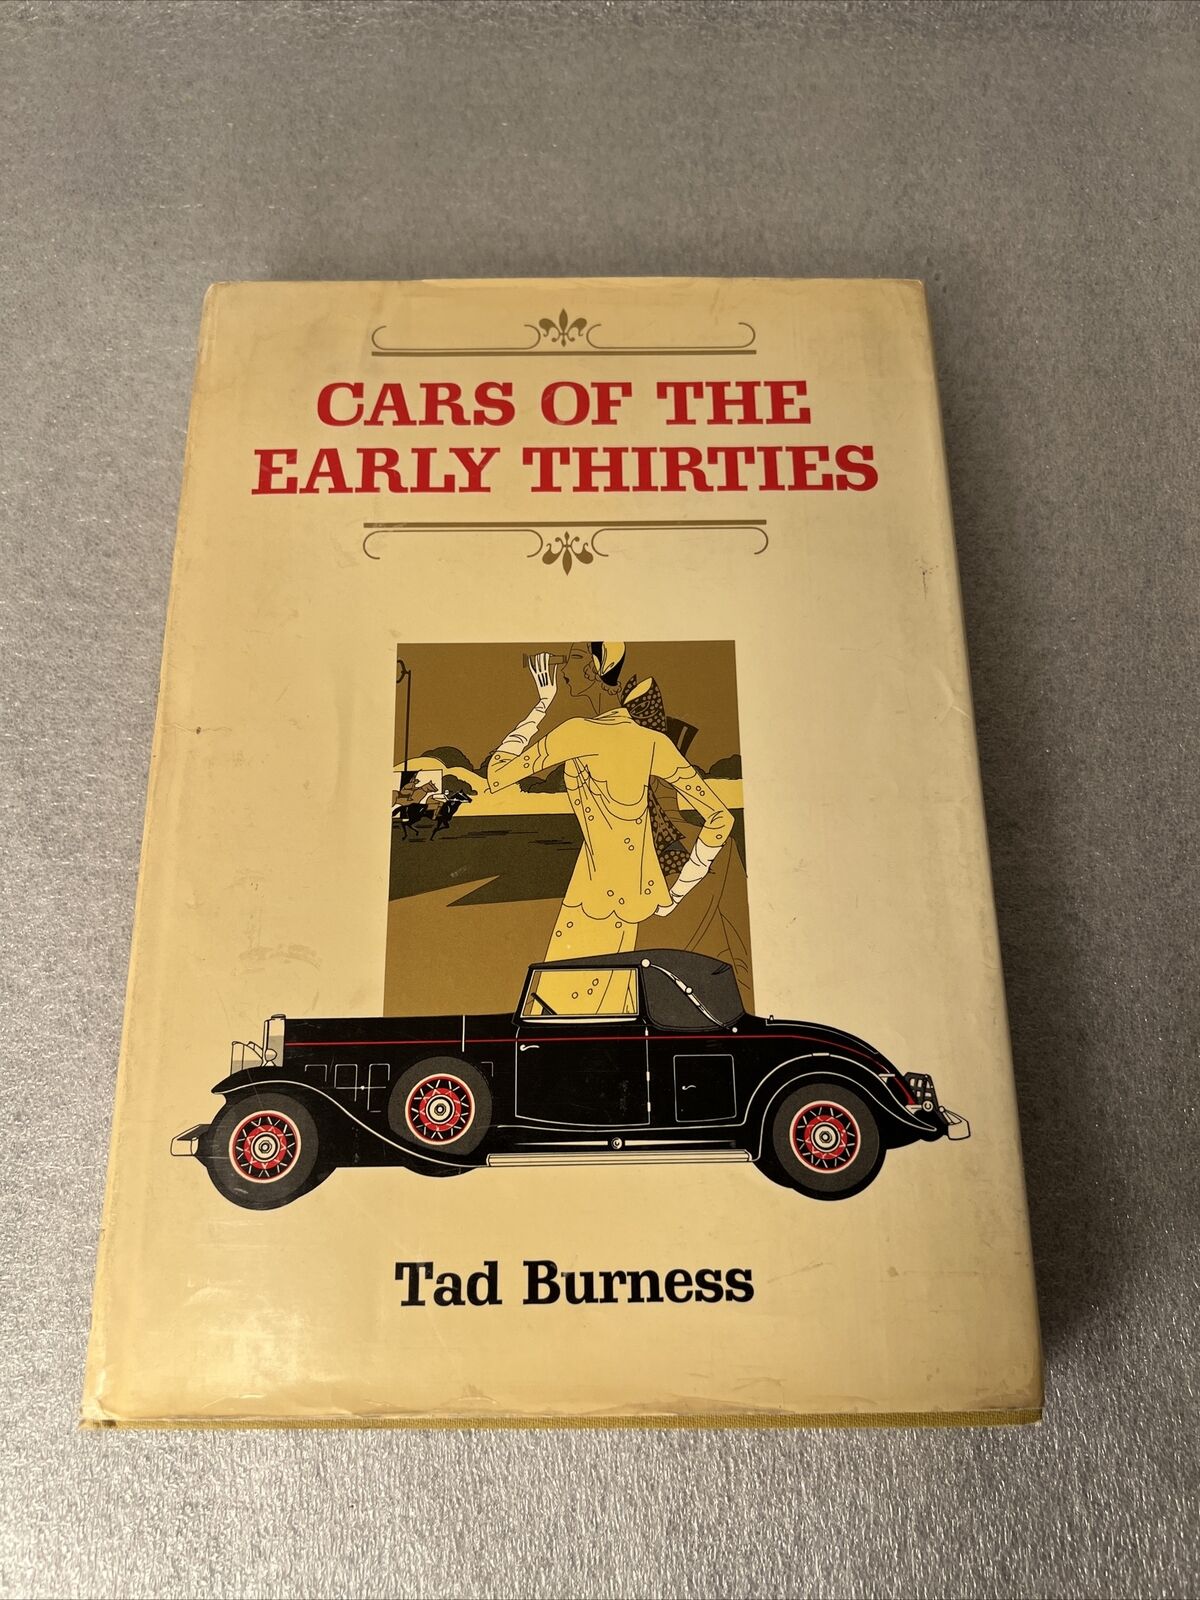 Cars of the Early Thirties by Tad Burness (Hardcover)